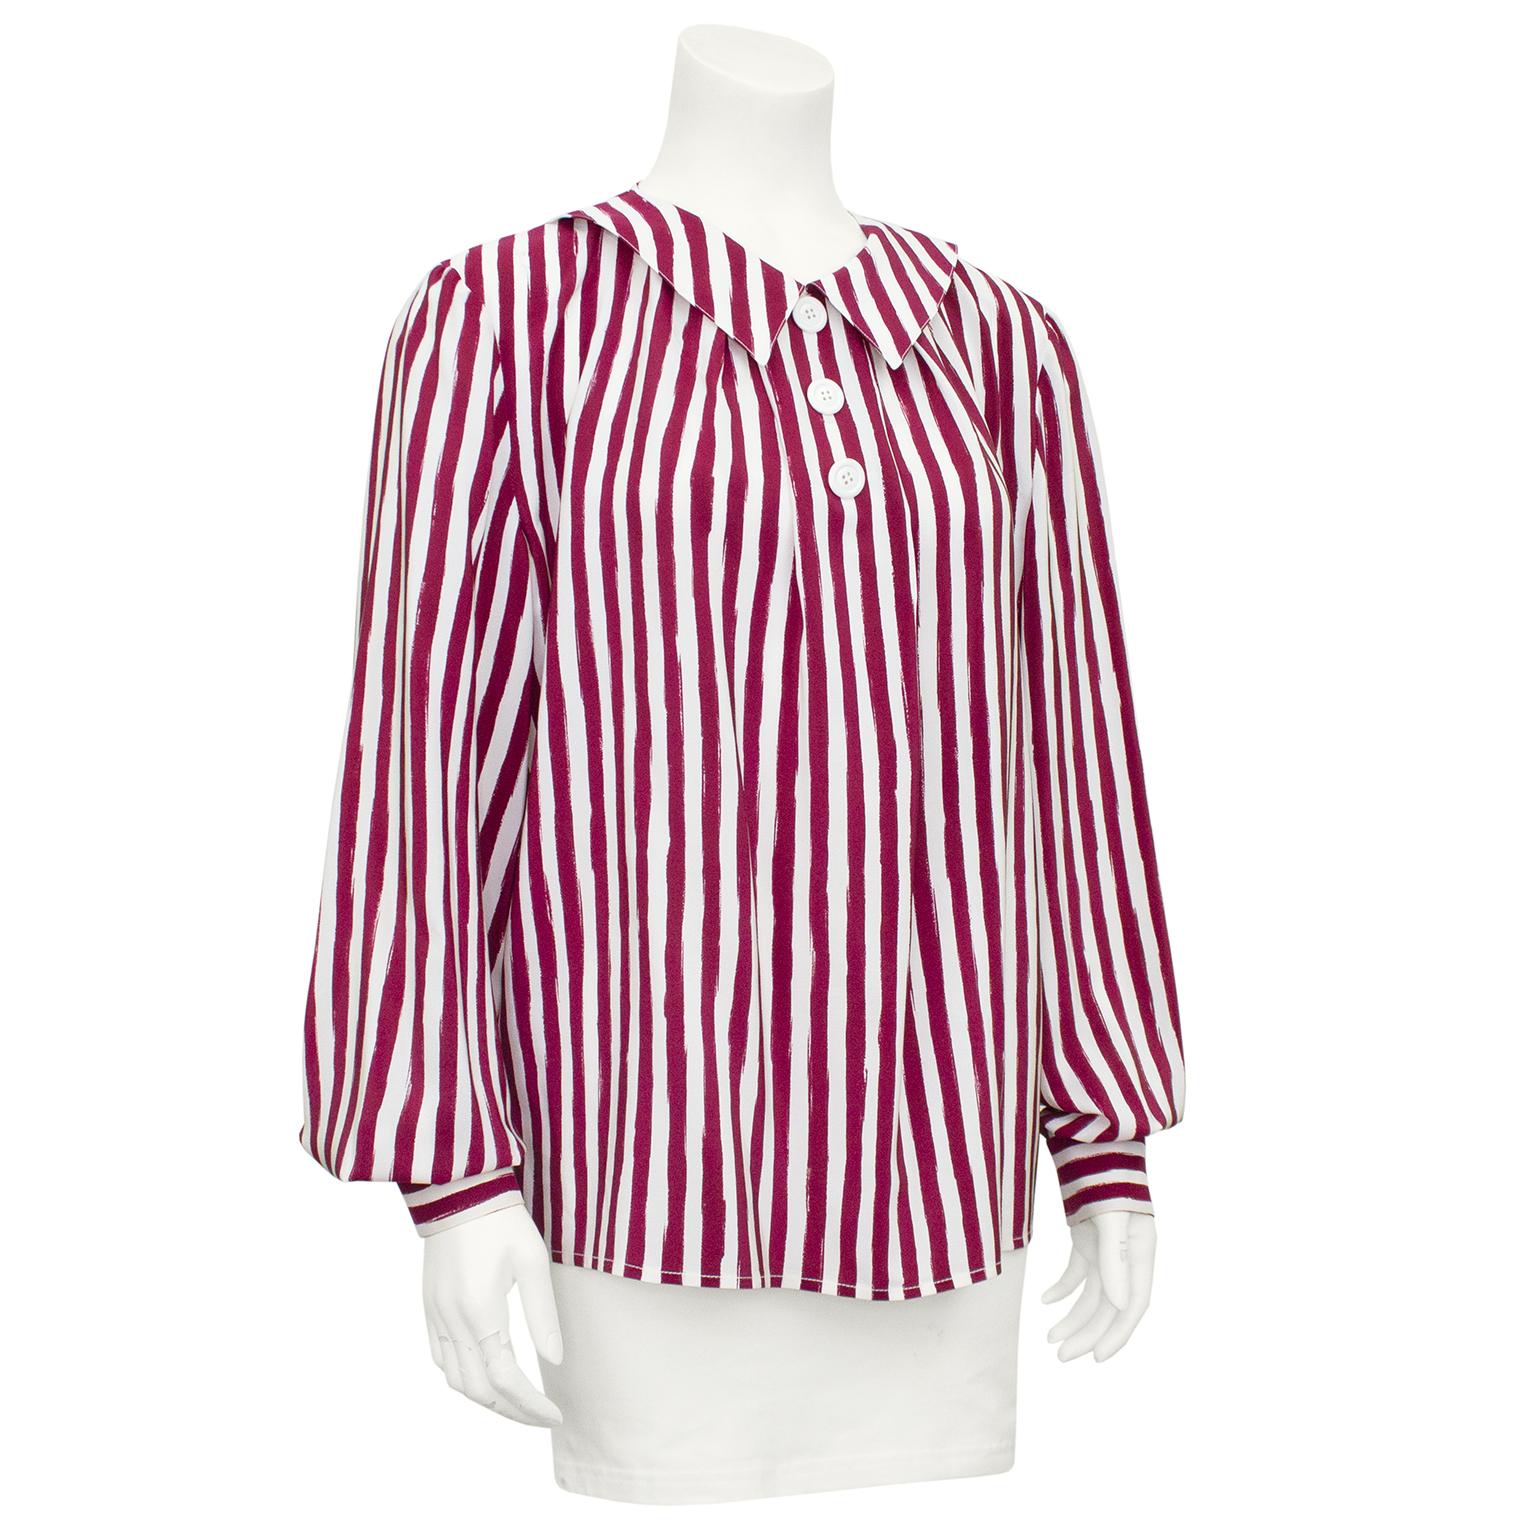 Very sweet 1980s Valentino blouse. Deep burgundy and white vertical stripes. Burgundy stripes look like paint strokes and are all slightly different. Demi Peter Pan collar with three large white plastic faux buttons and collar. Fits loose through